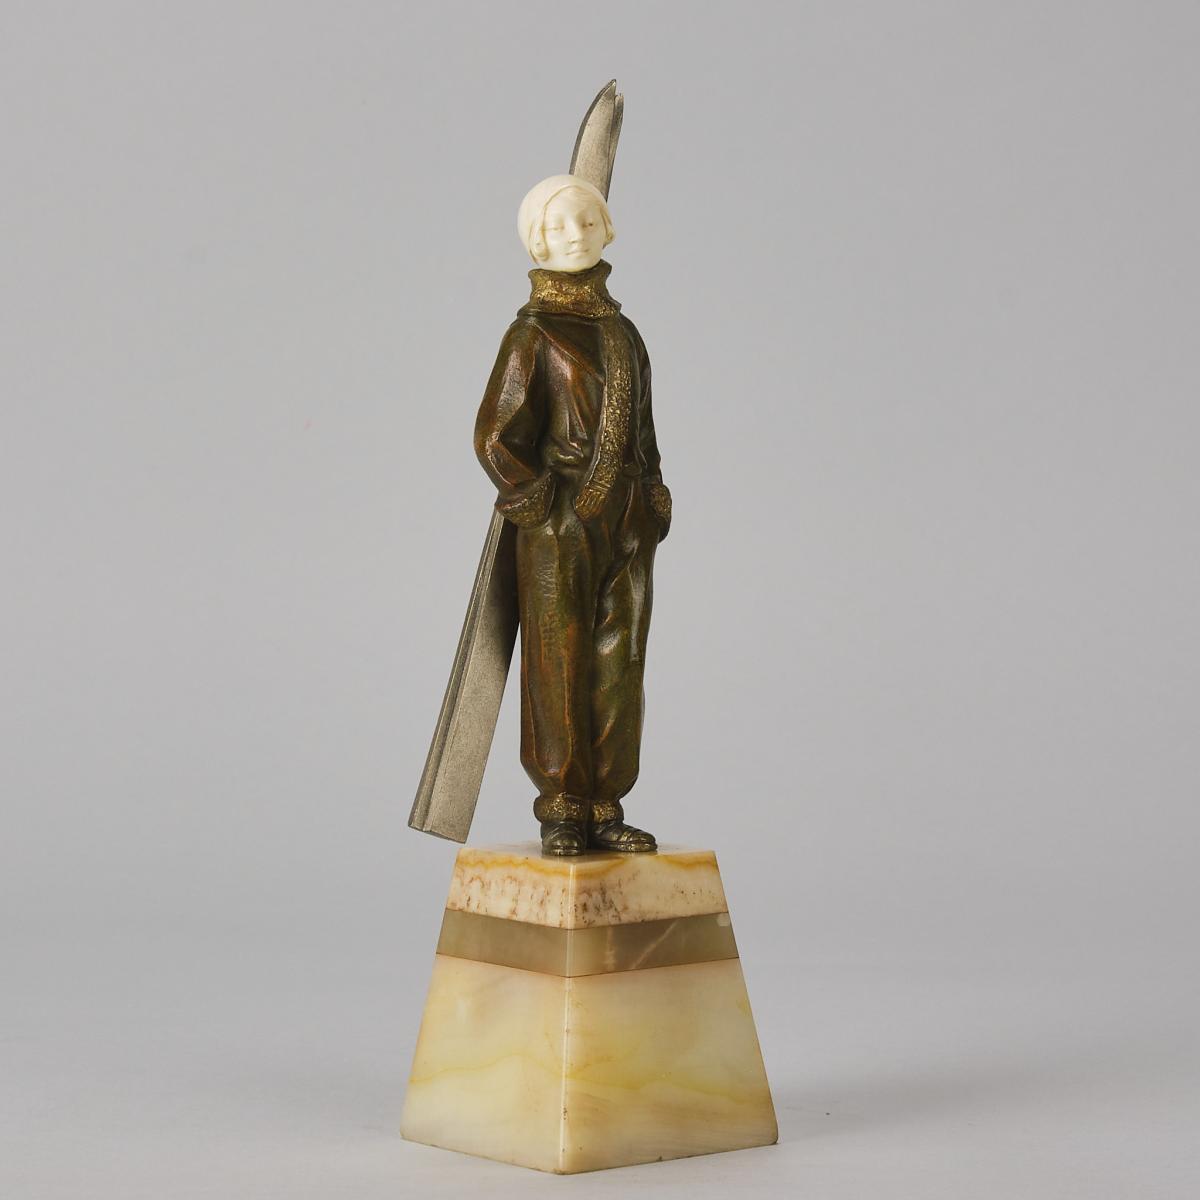 Early 20th Century Chryselephantine Sculpture entitled "Girl Skier" by Louis Sosson